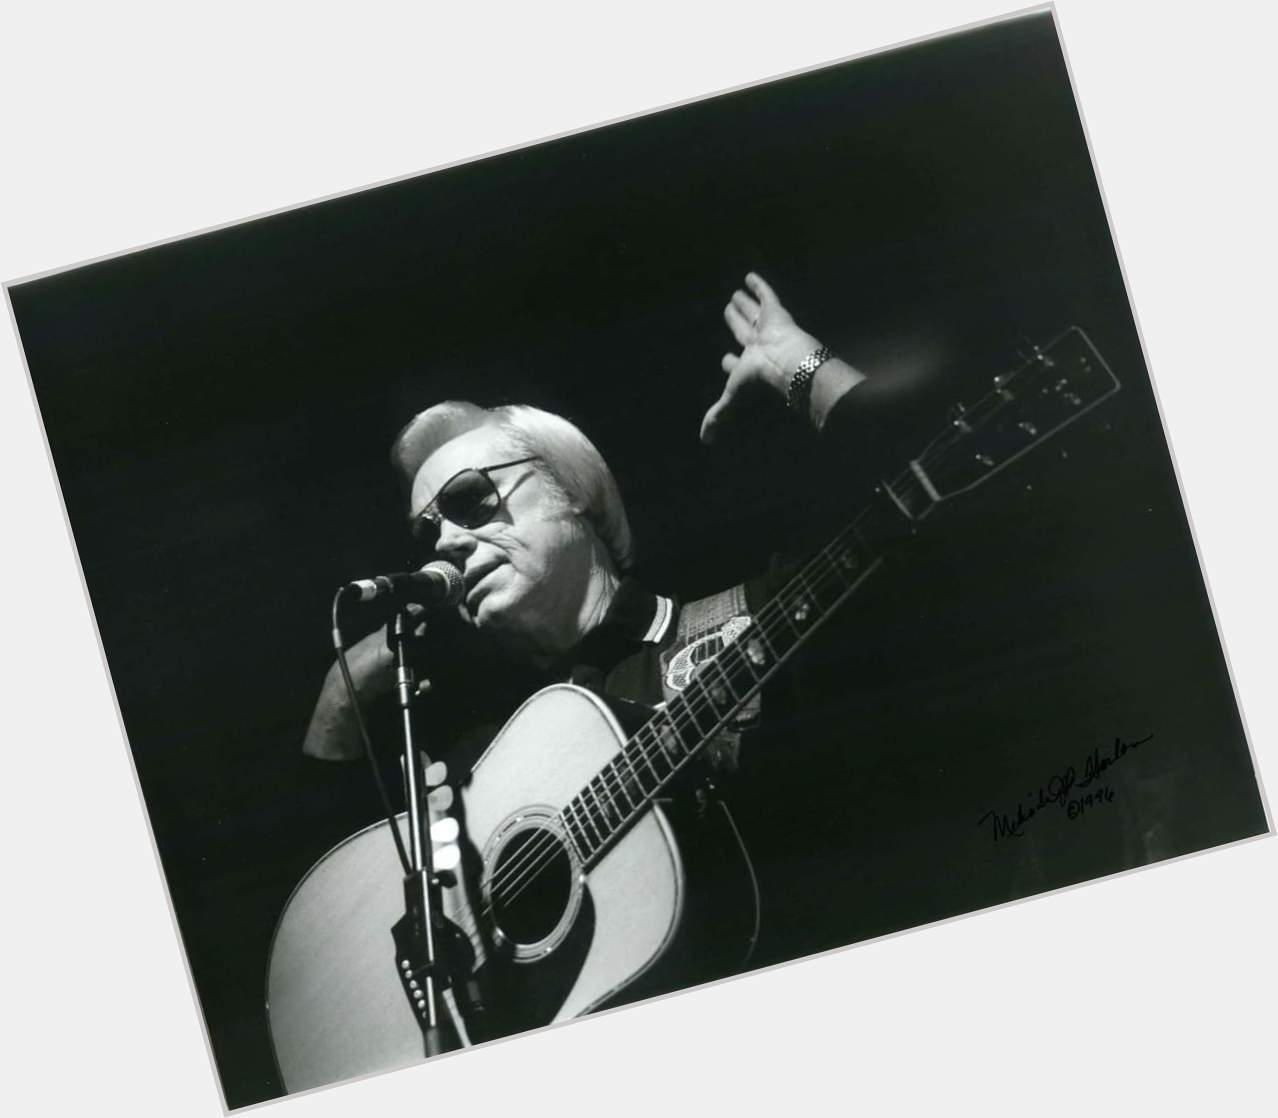 Happy heavenly birthday to my all time favorite country singer, George Jones!  